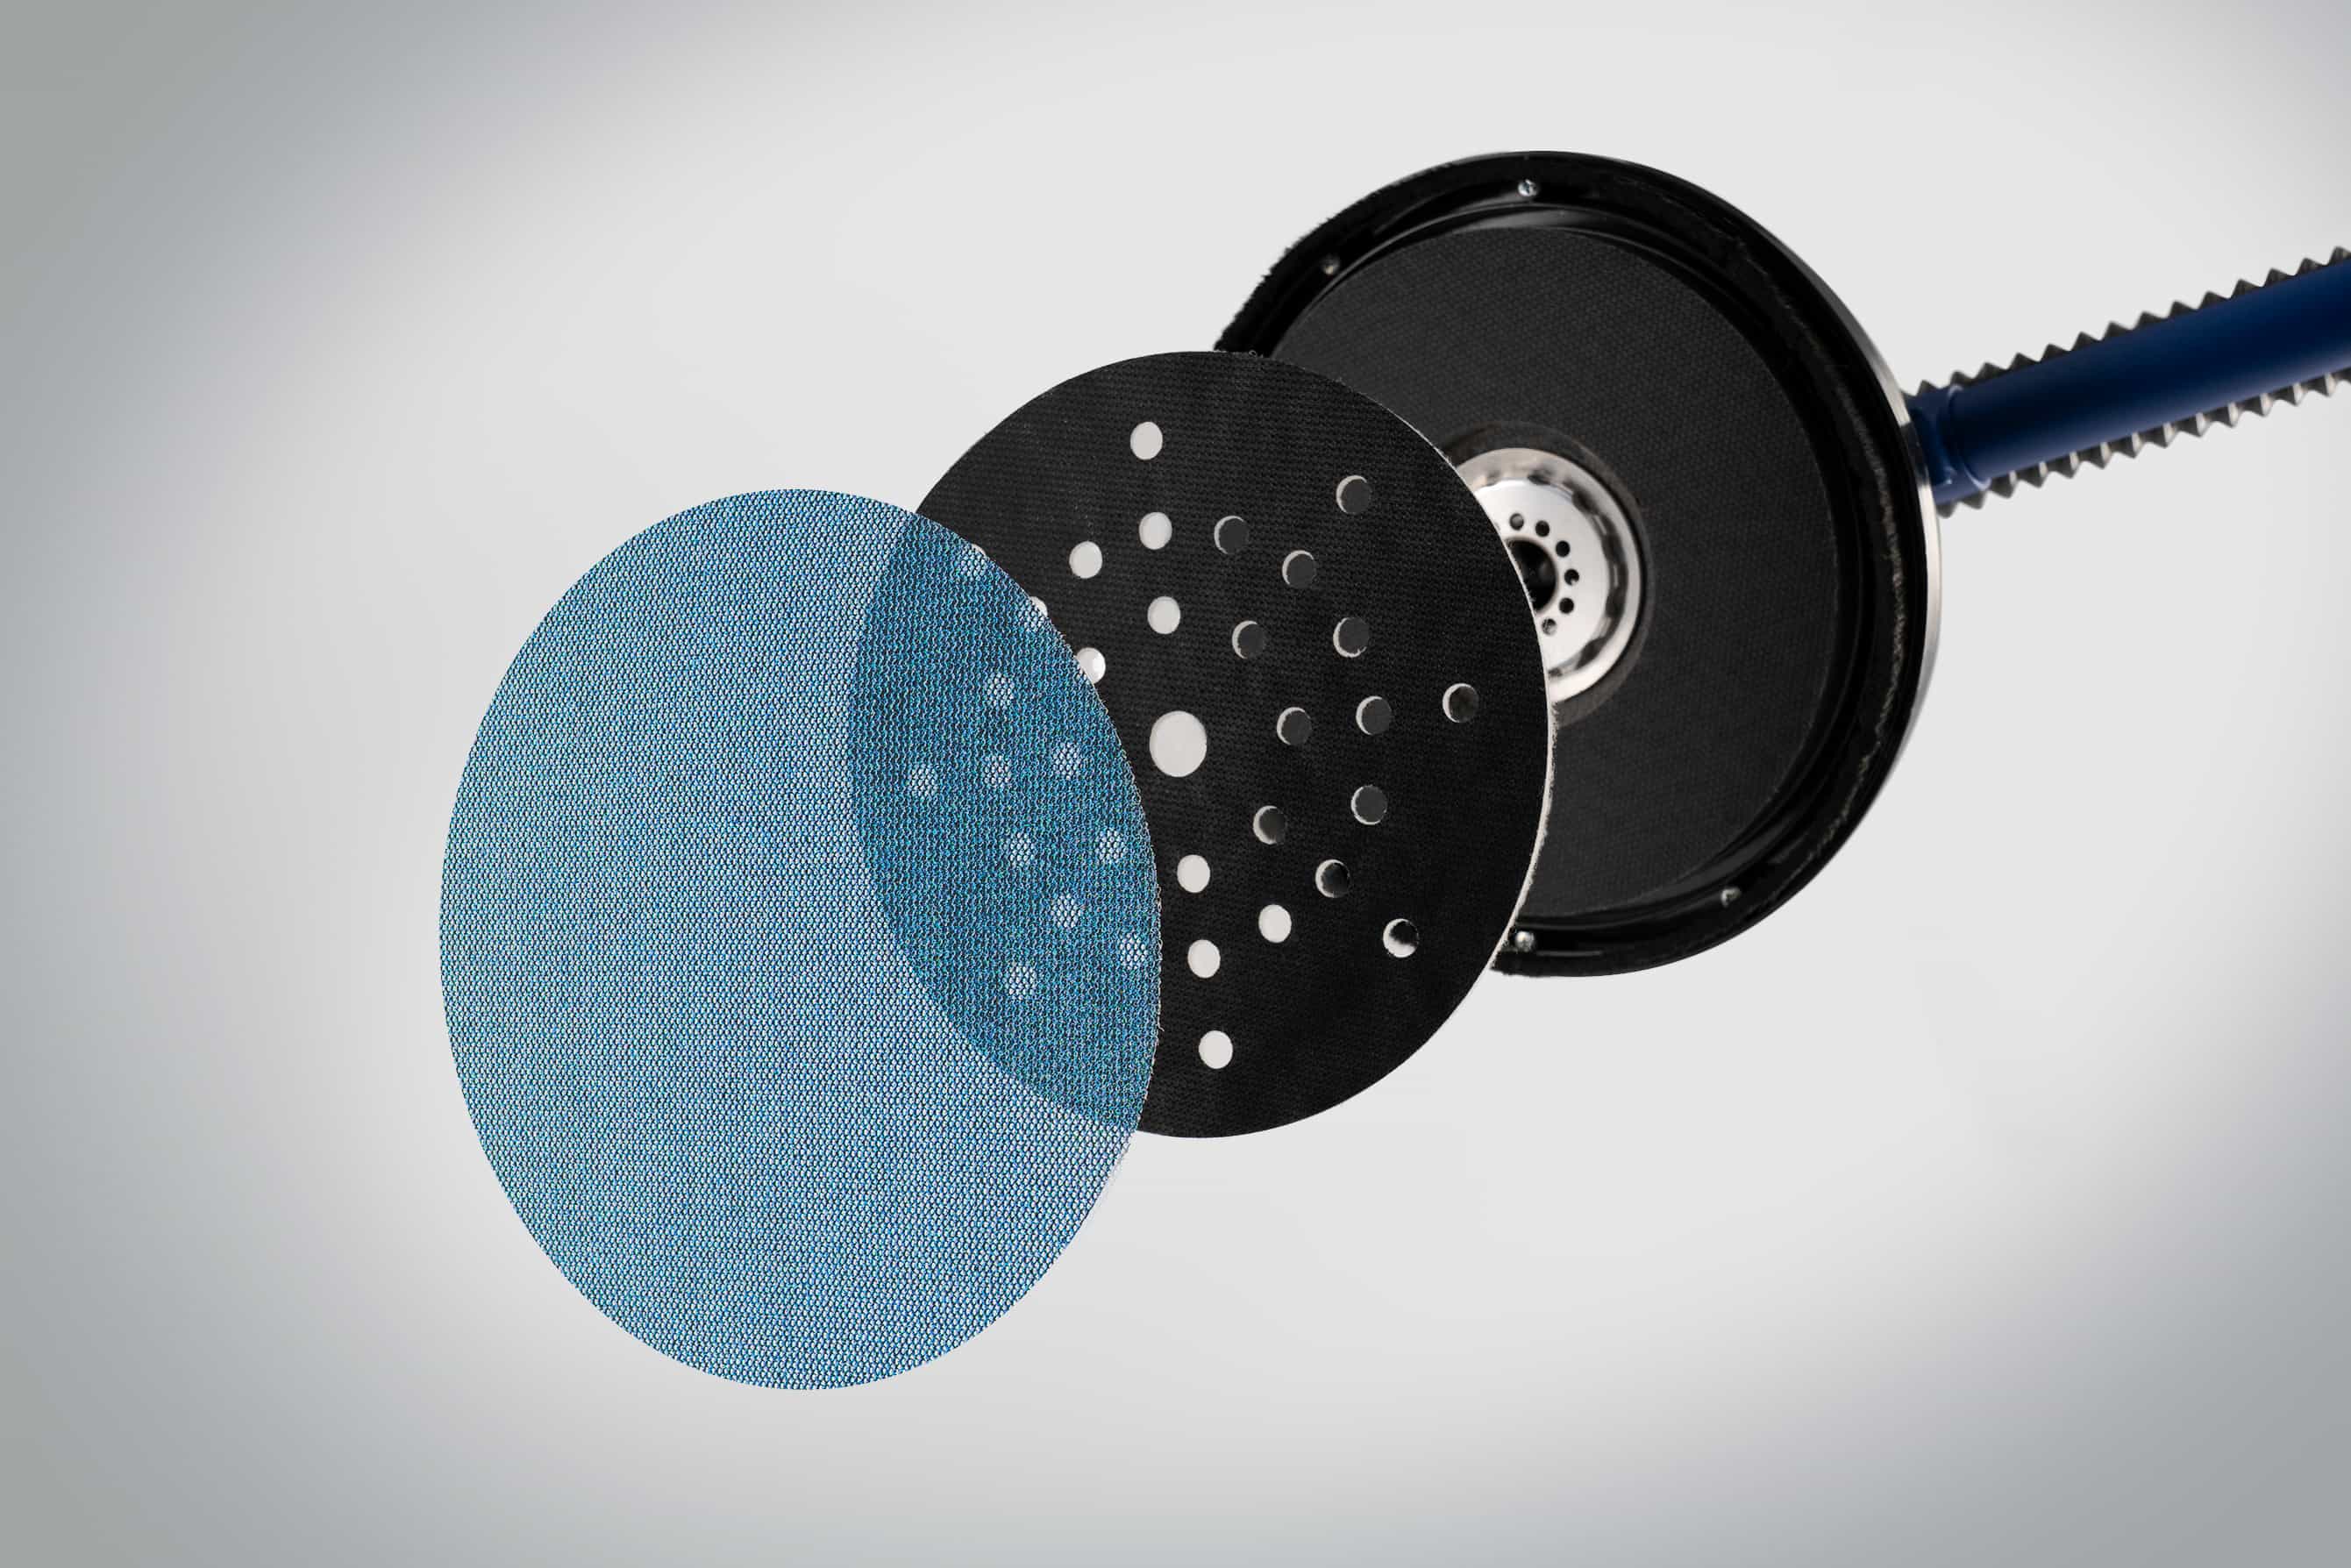 Innovatively designed to protect the backing pad and increase its lifespan, while providing maximum dust extraction. It is ideal for use with 750 Net Discs 225mm and 510 Velour discs 225mm.